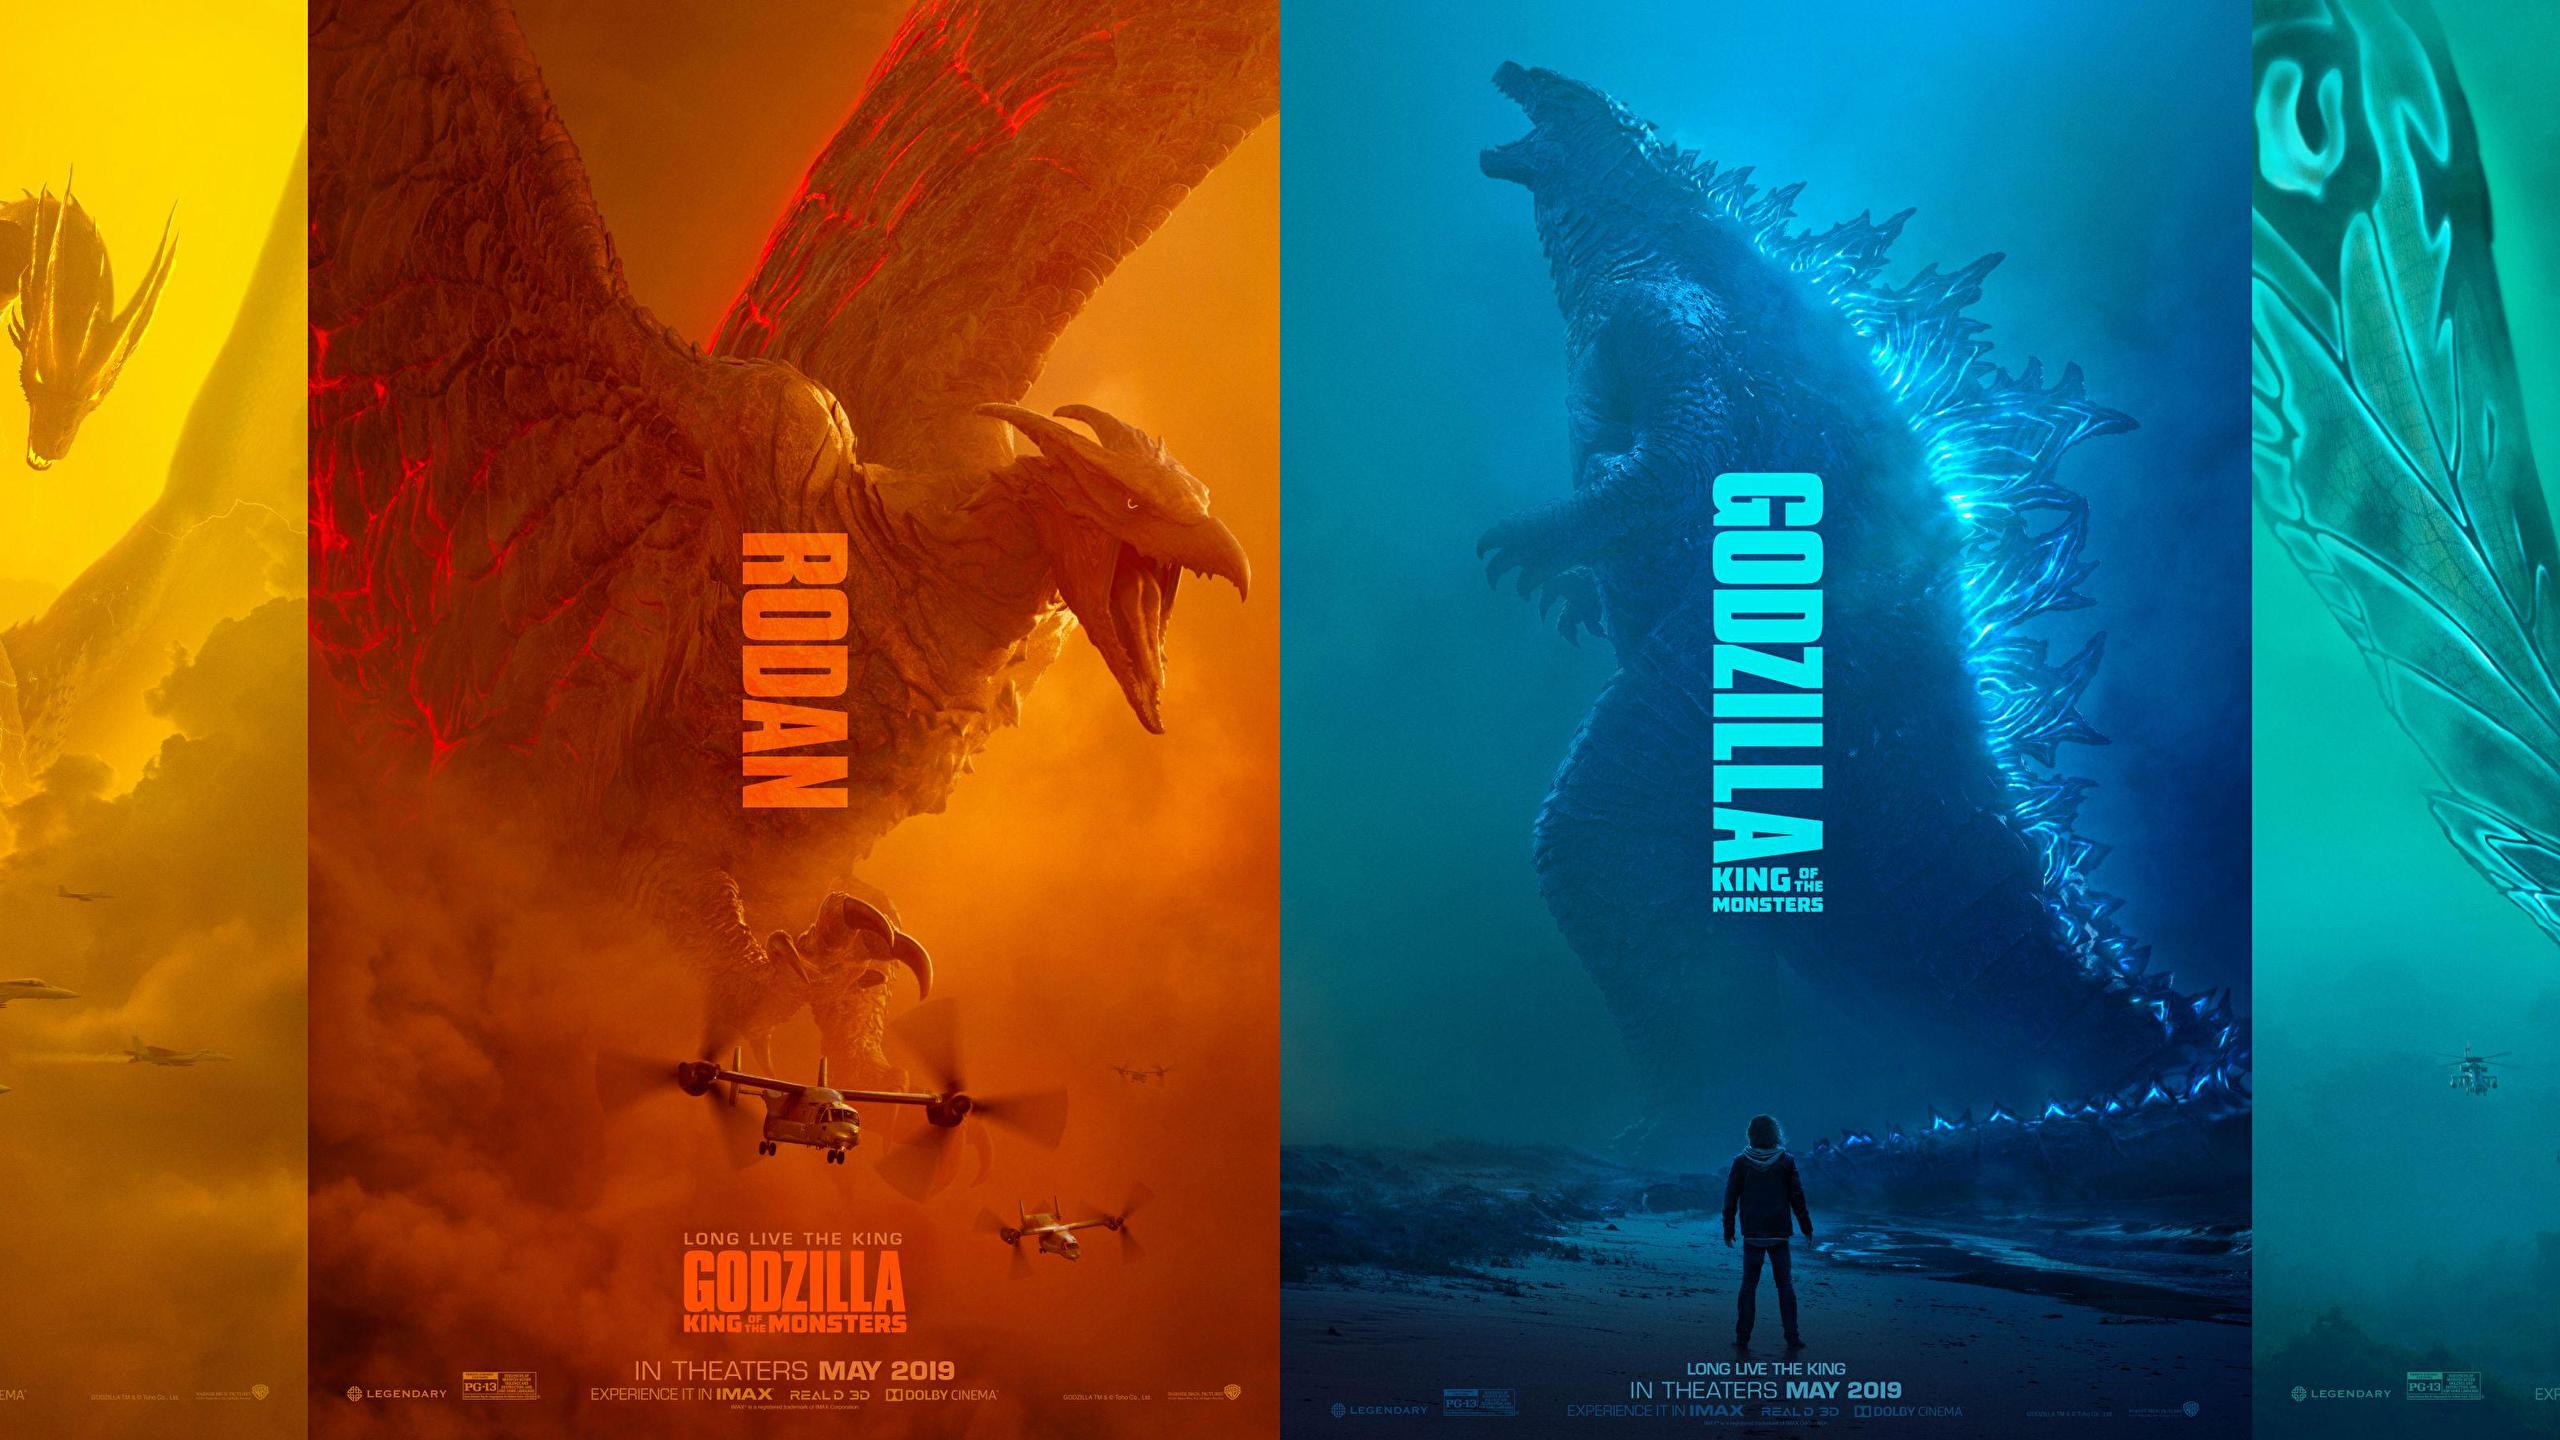 Free download I made an Ultra Wide wallpaper from the Godzilla posters wallpaper [2560x1440] for your Desktop, Mobile & Tablet. Explore Godzilla 2 Wallpaper. Godzilla 2 Wallpaper, Godzilla Wallpaper, Godzilla Wallpaper